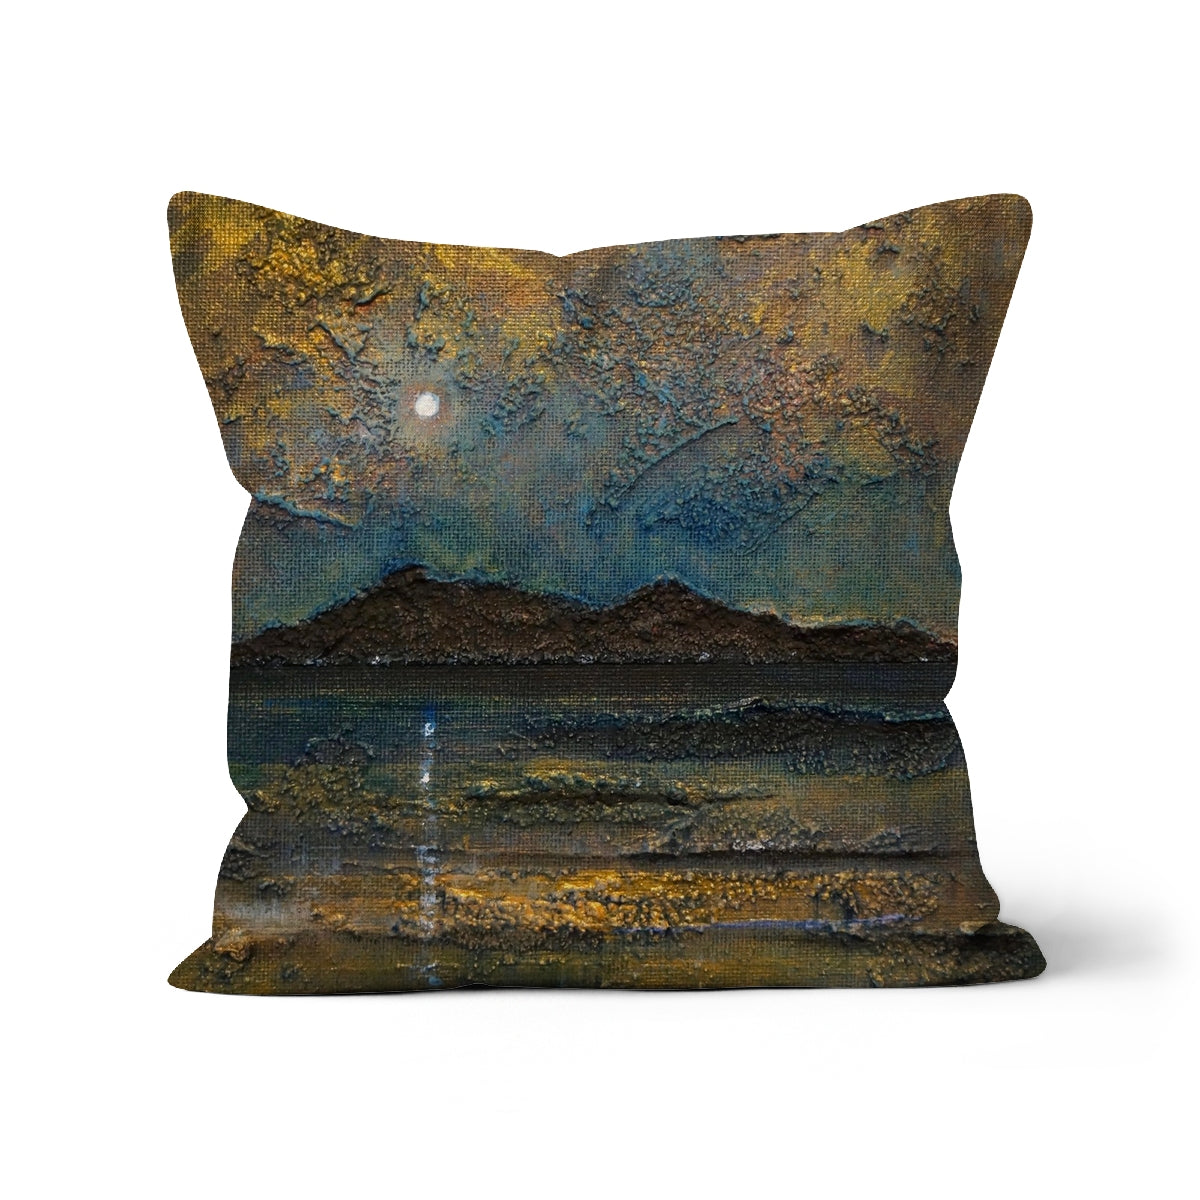 Arran Moonlight Art Gifts Cushion-Cushions-Arran Art Gallery-Faux Suede-18"x18"-Paintings, Prints, Homeware, Art Gifts From Scotland By Scottish Artist Kevin Hunter